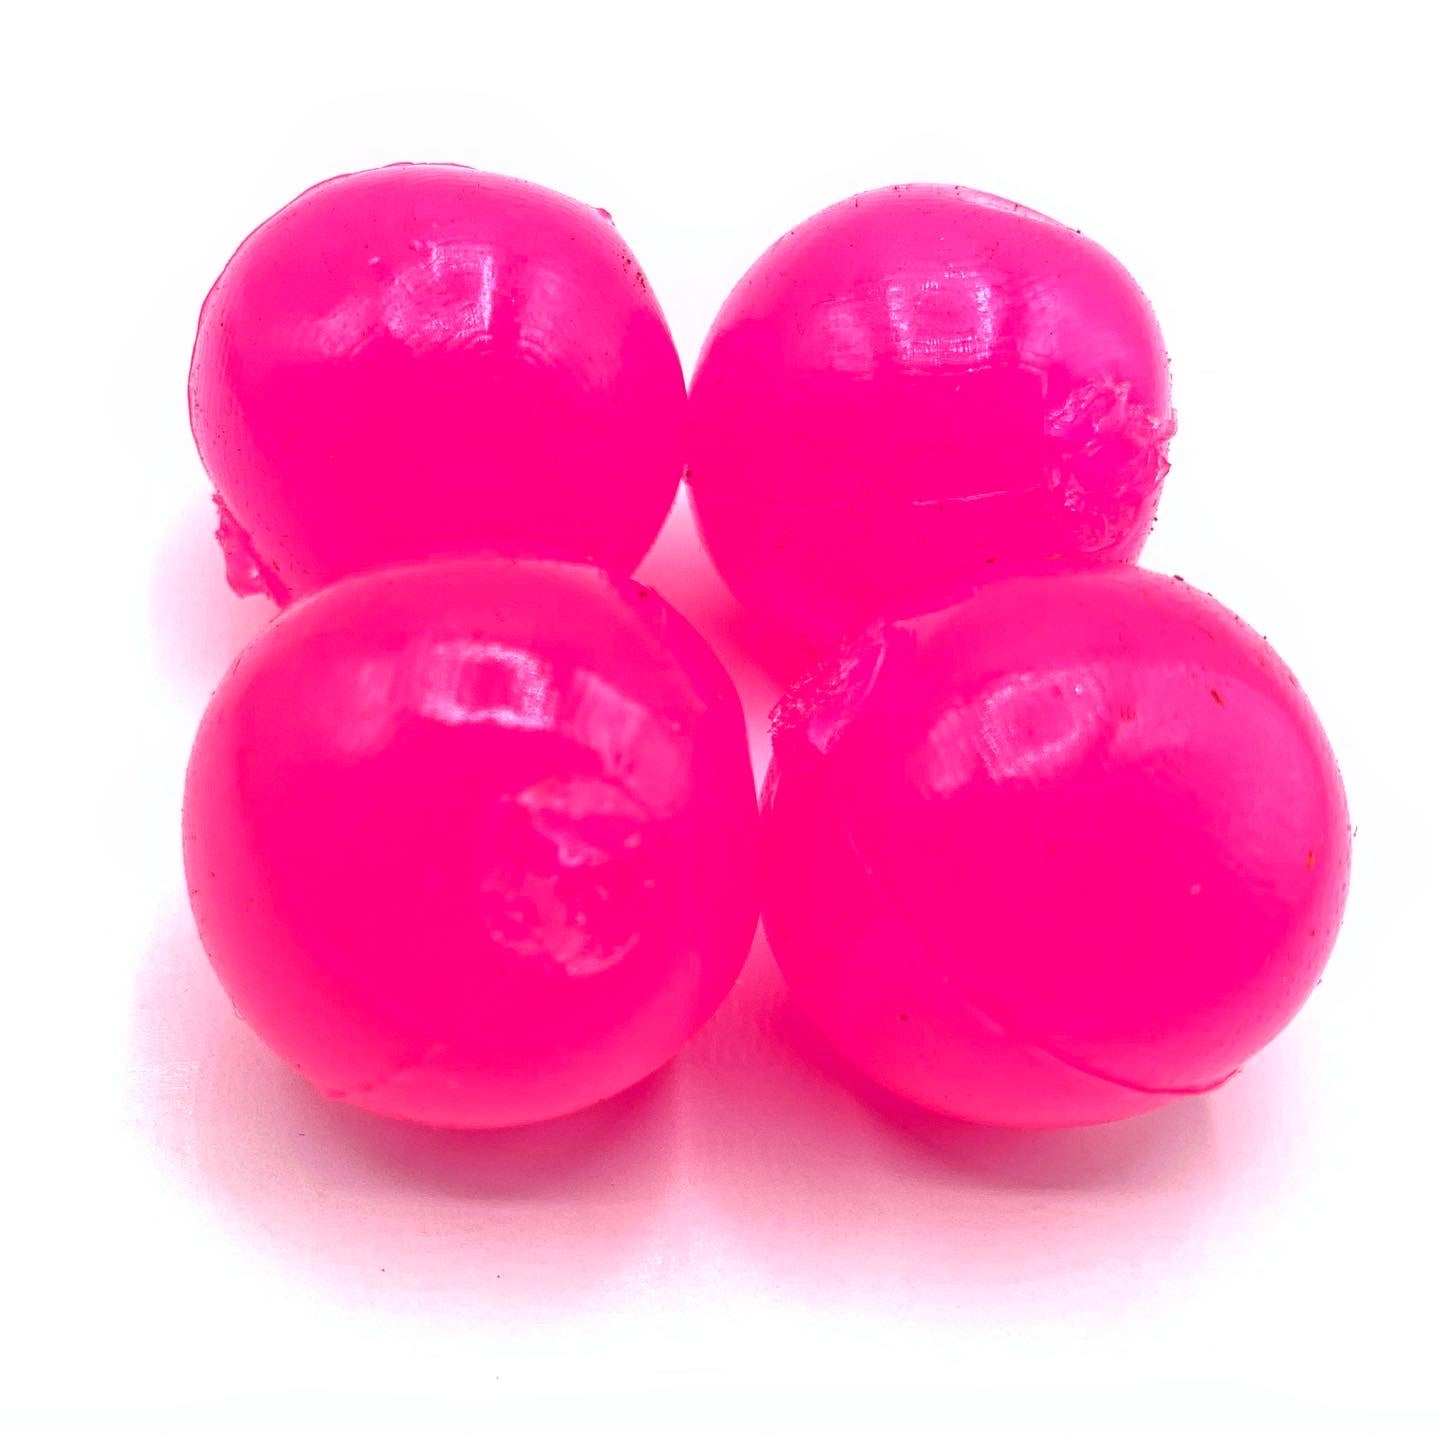 BnR Tackle 8mm Soft Beads